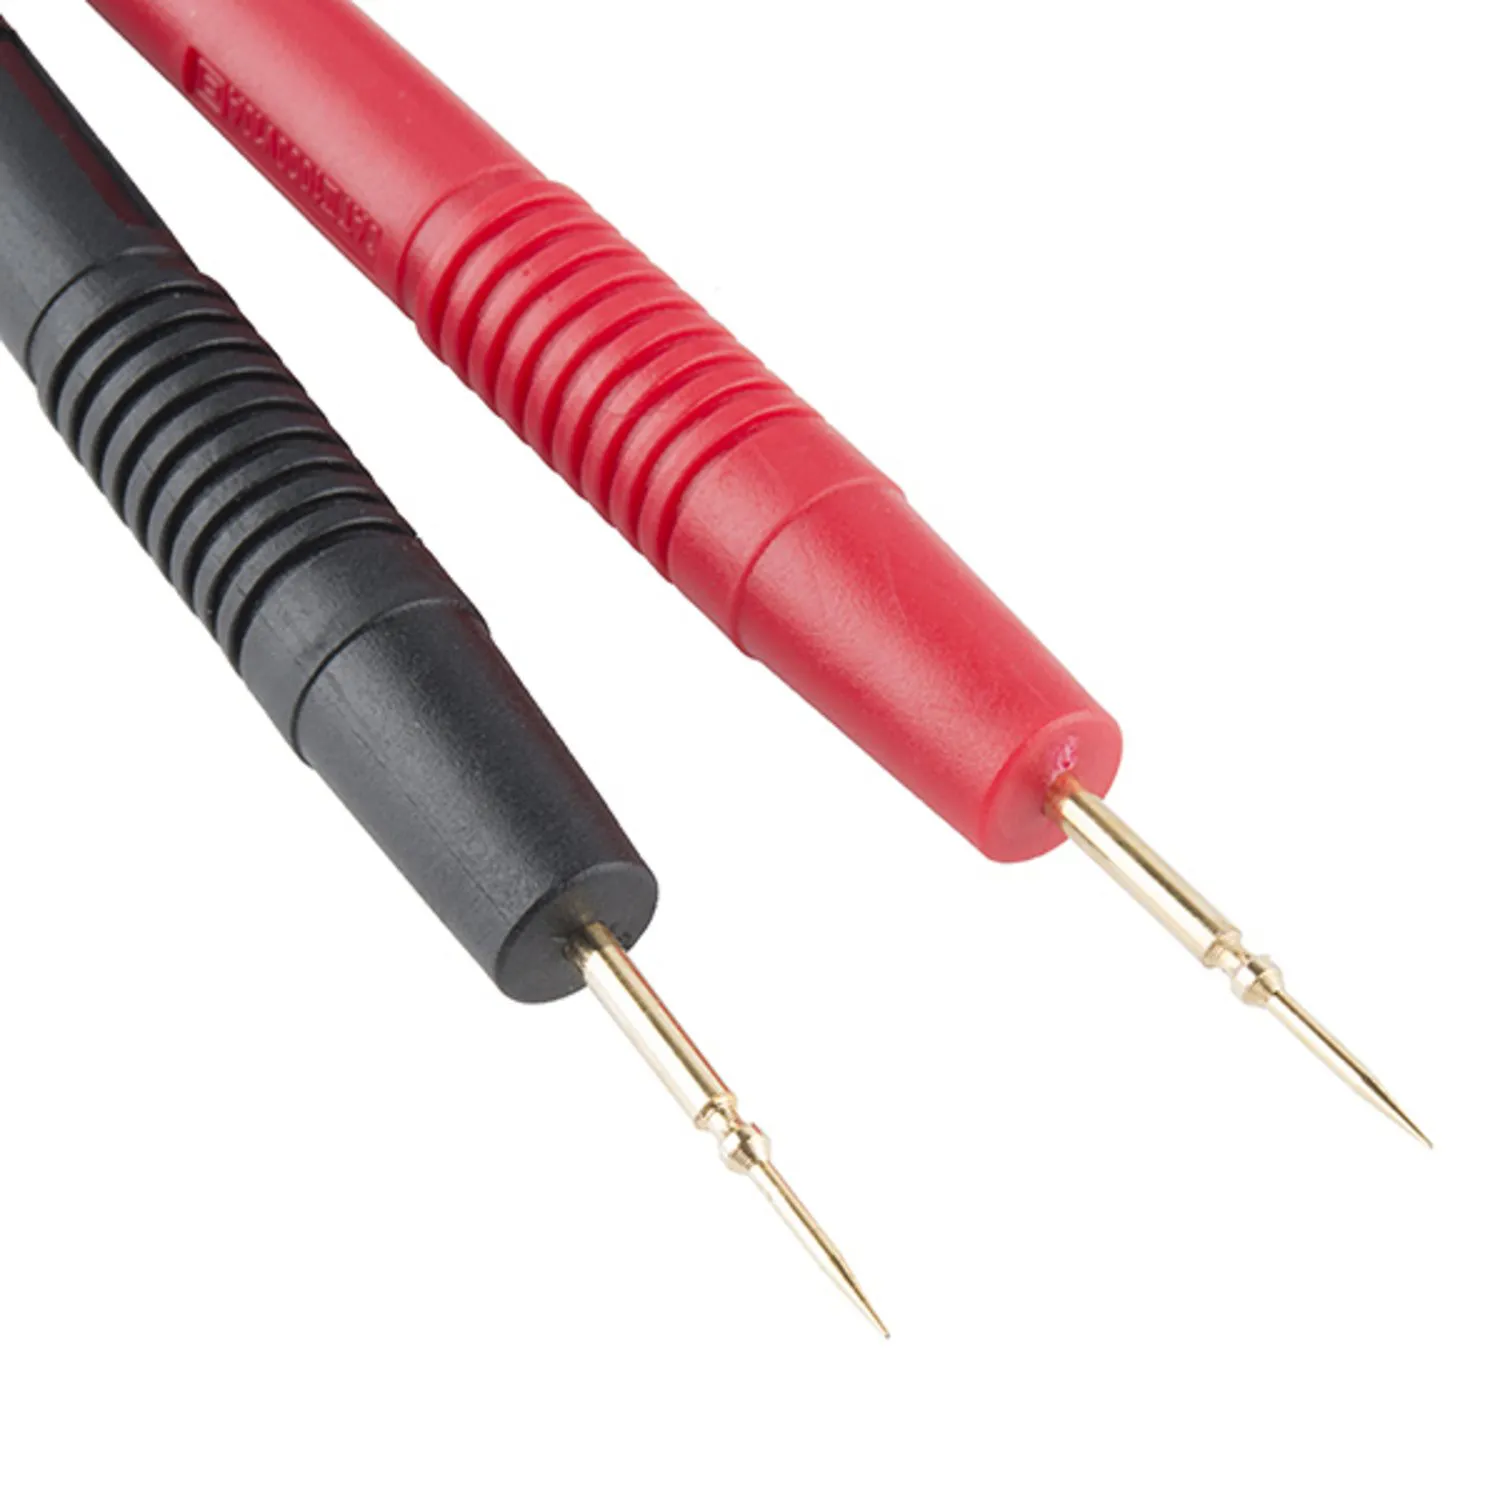 Photo of Multimeter Probes - Needle Tipped